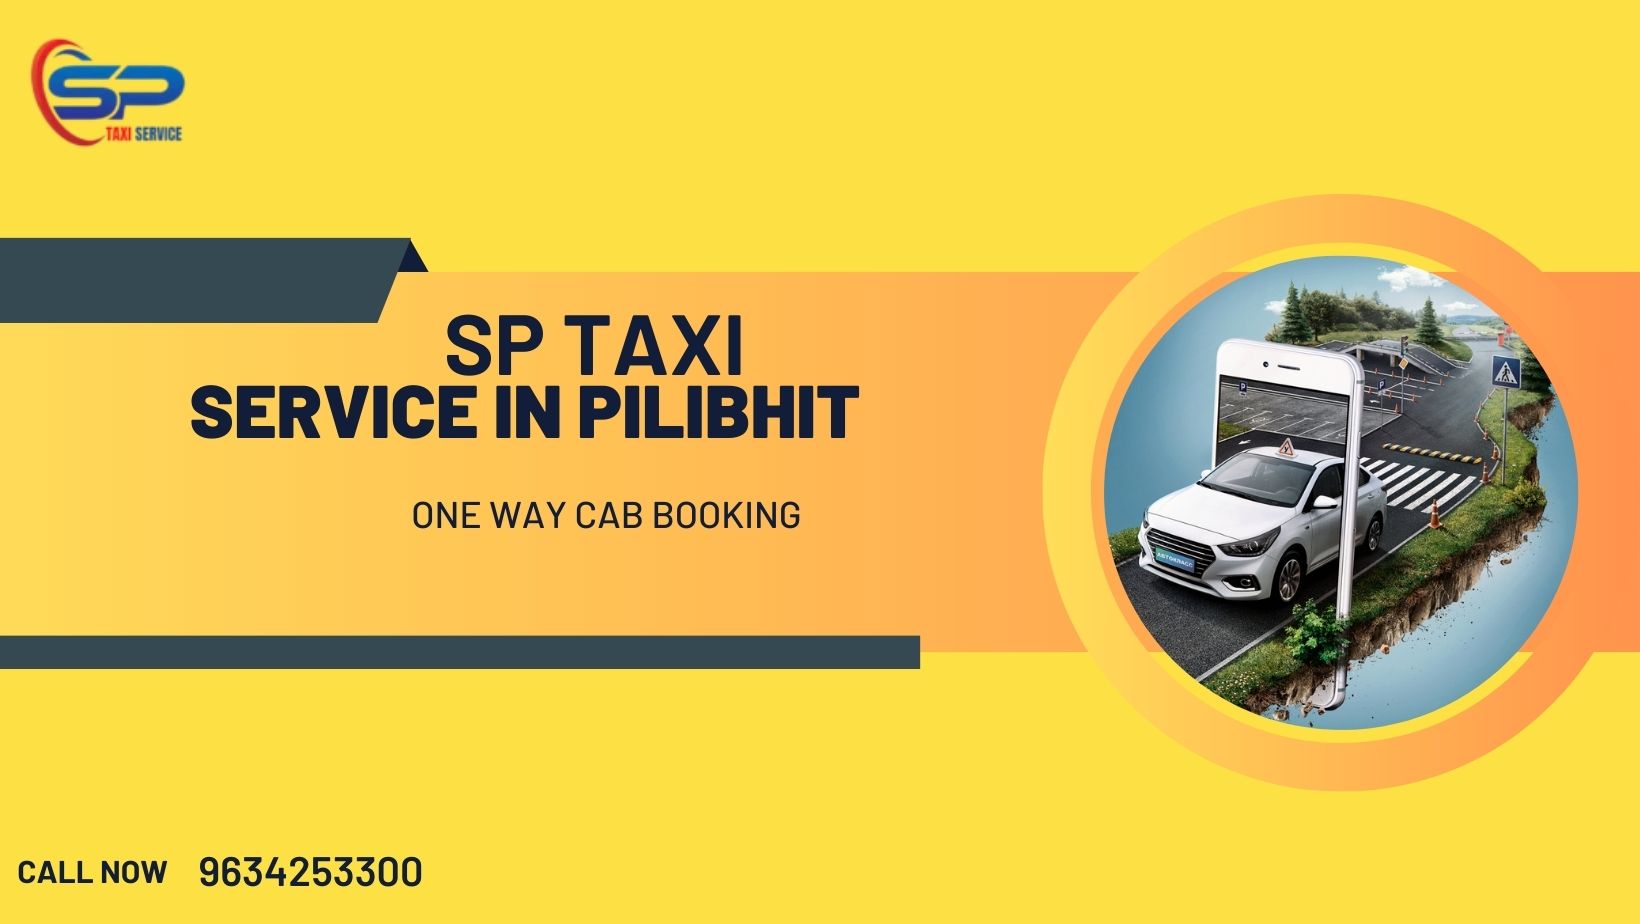 Pilibhit Taxi service